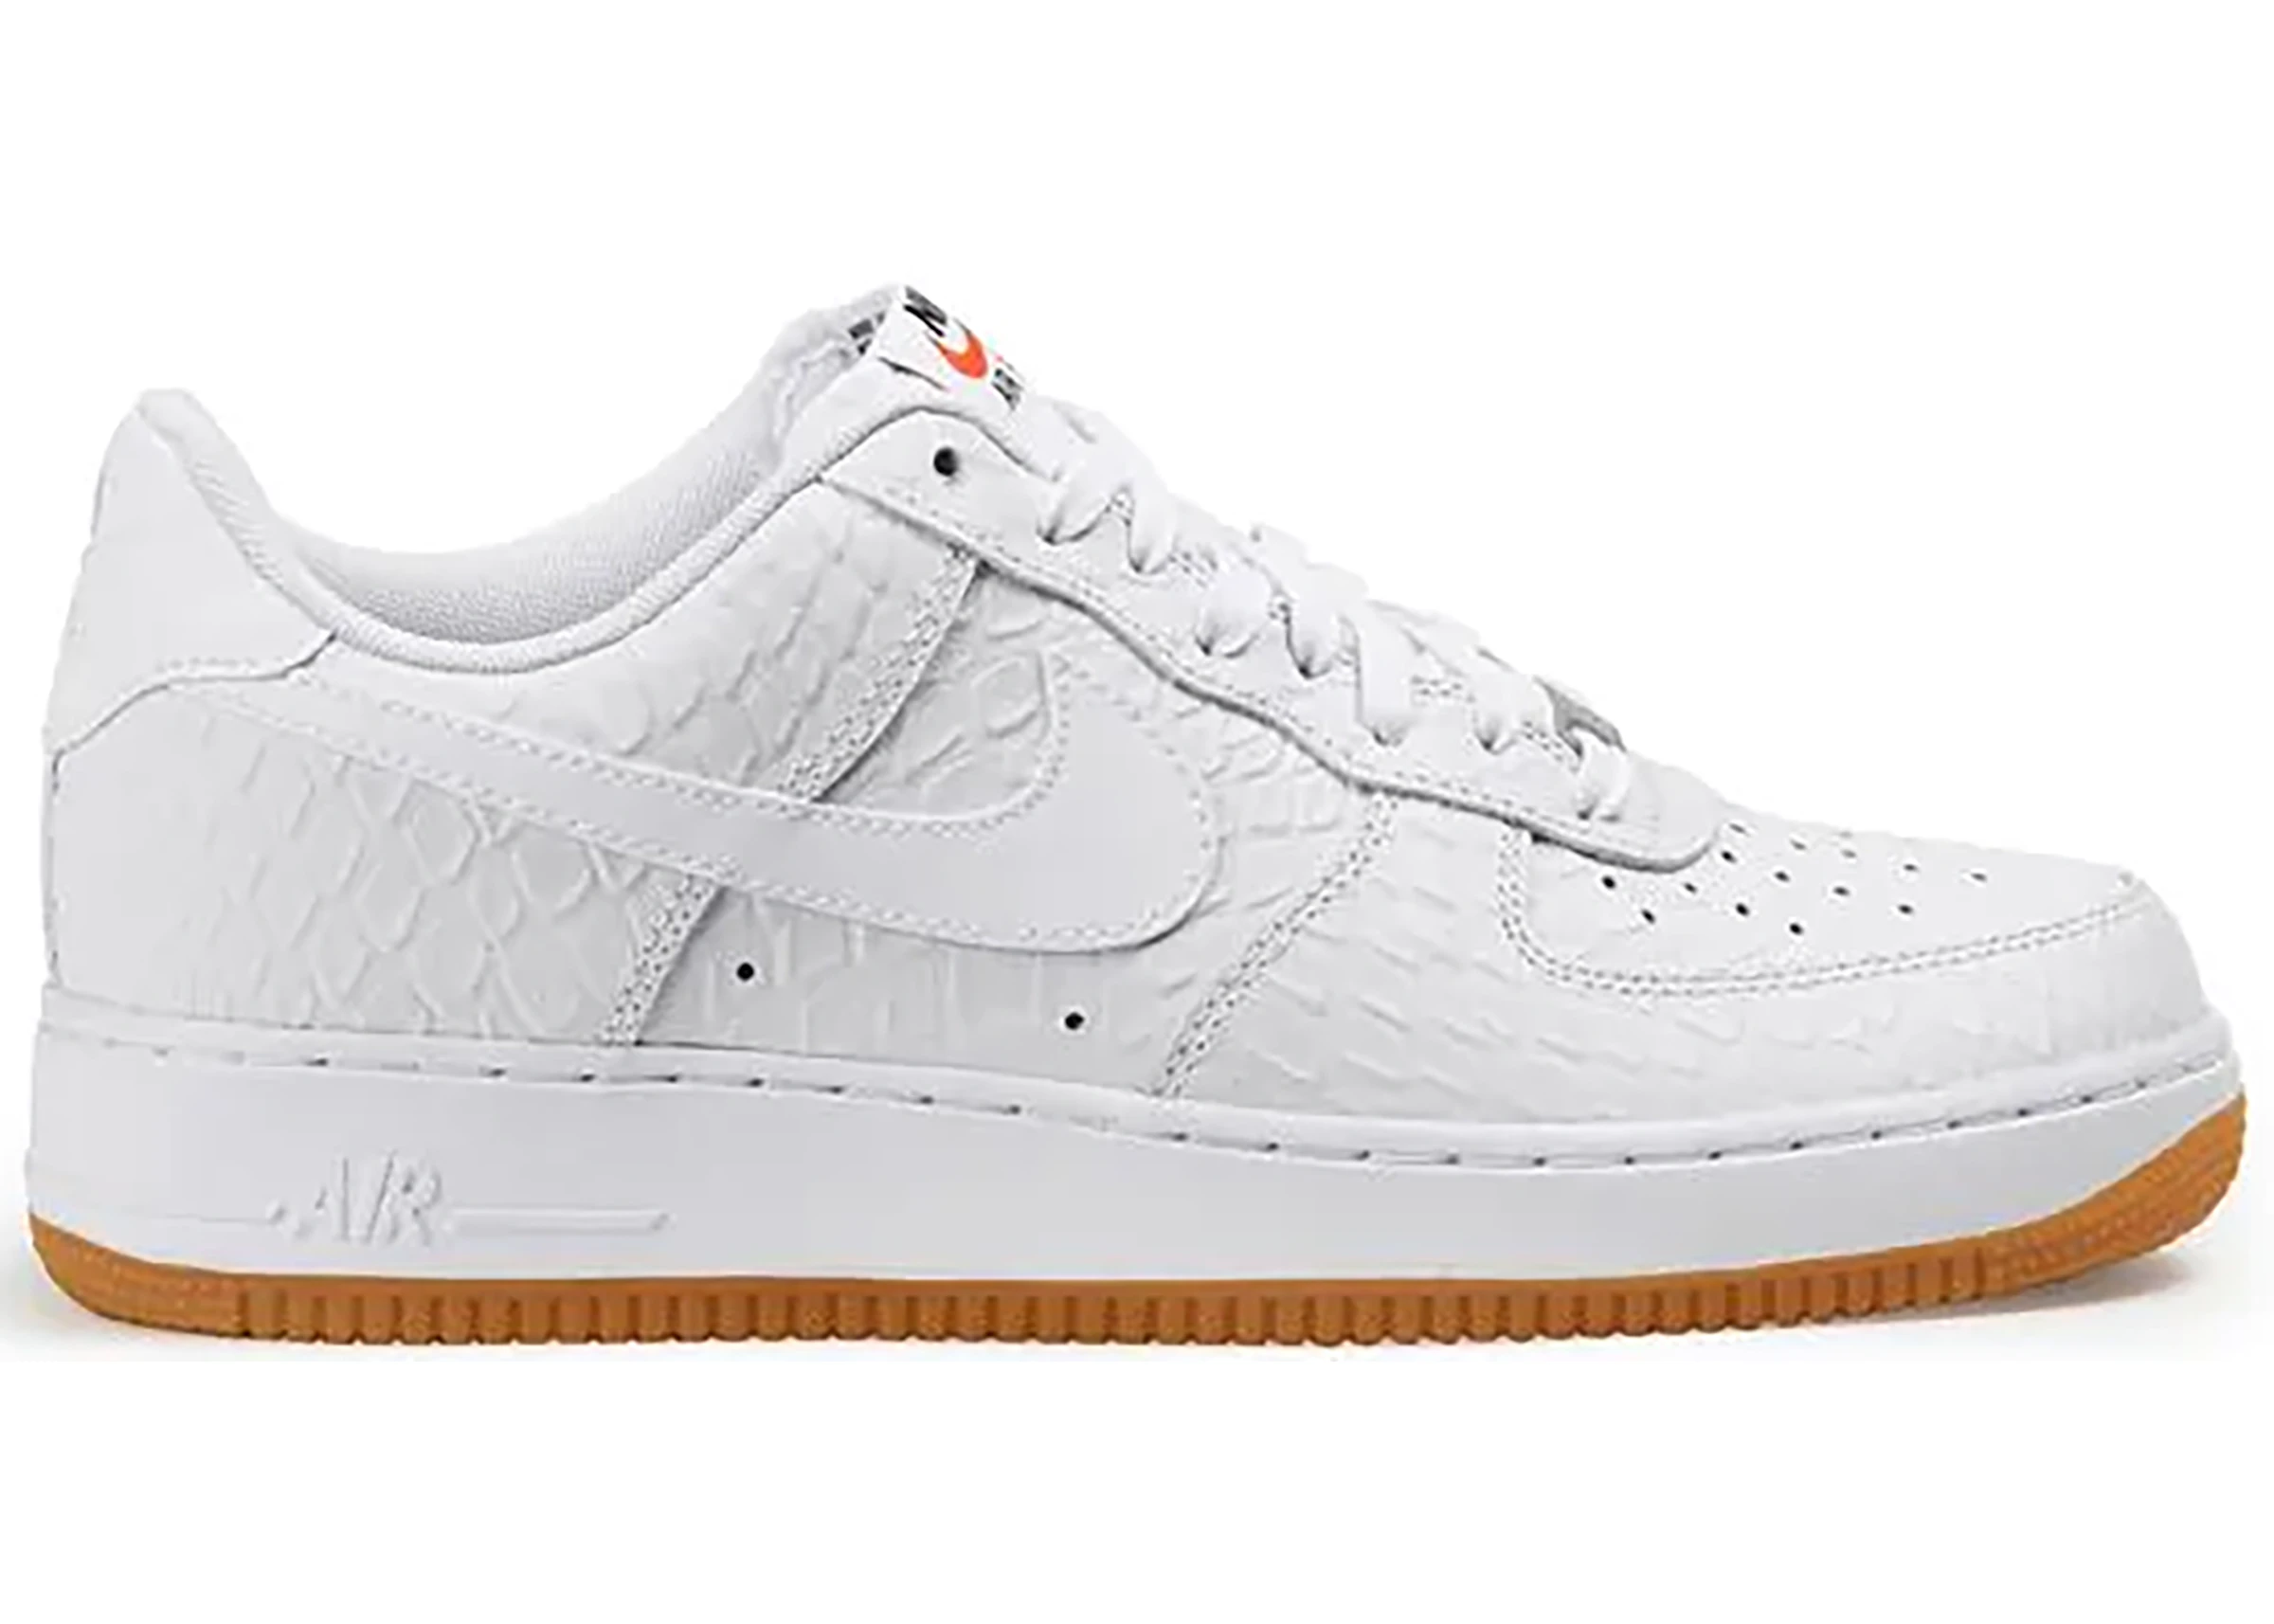 taal geef de bloem water insect Nike Air Force 1 Low Croc Gum White - 718152-100 - US